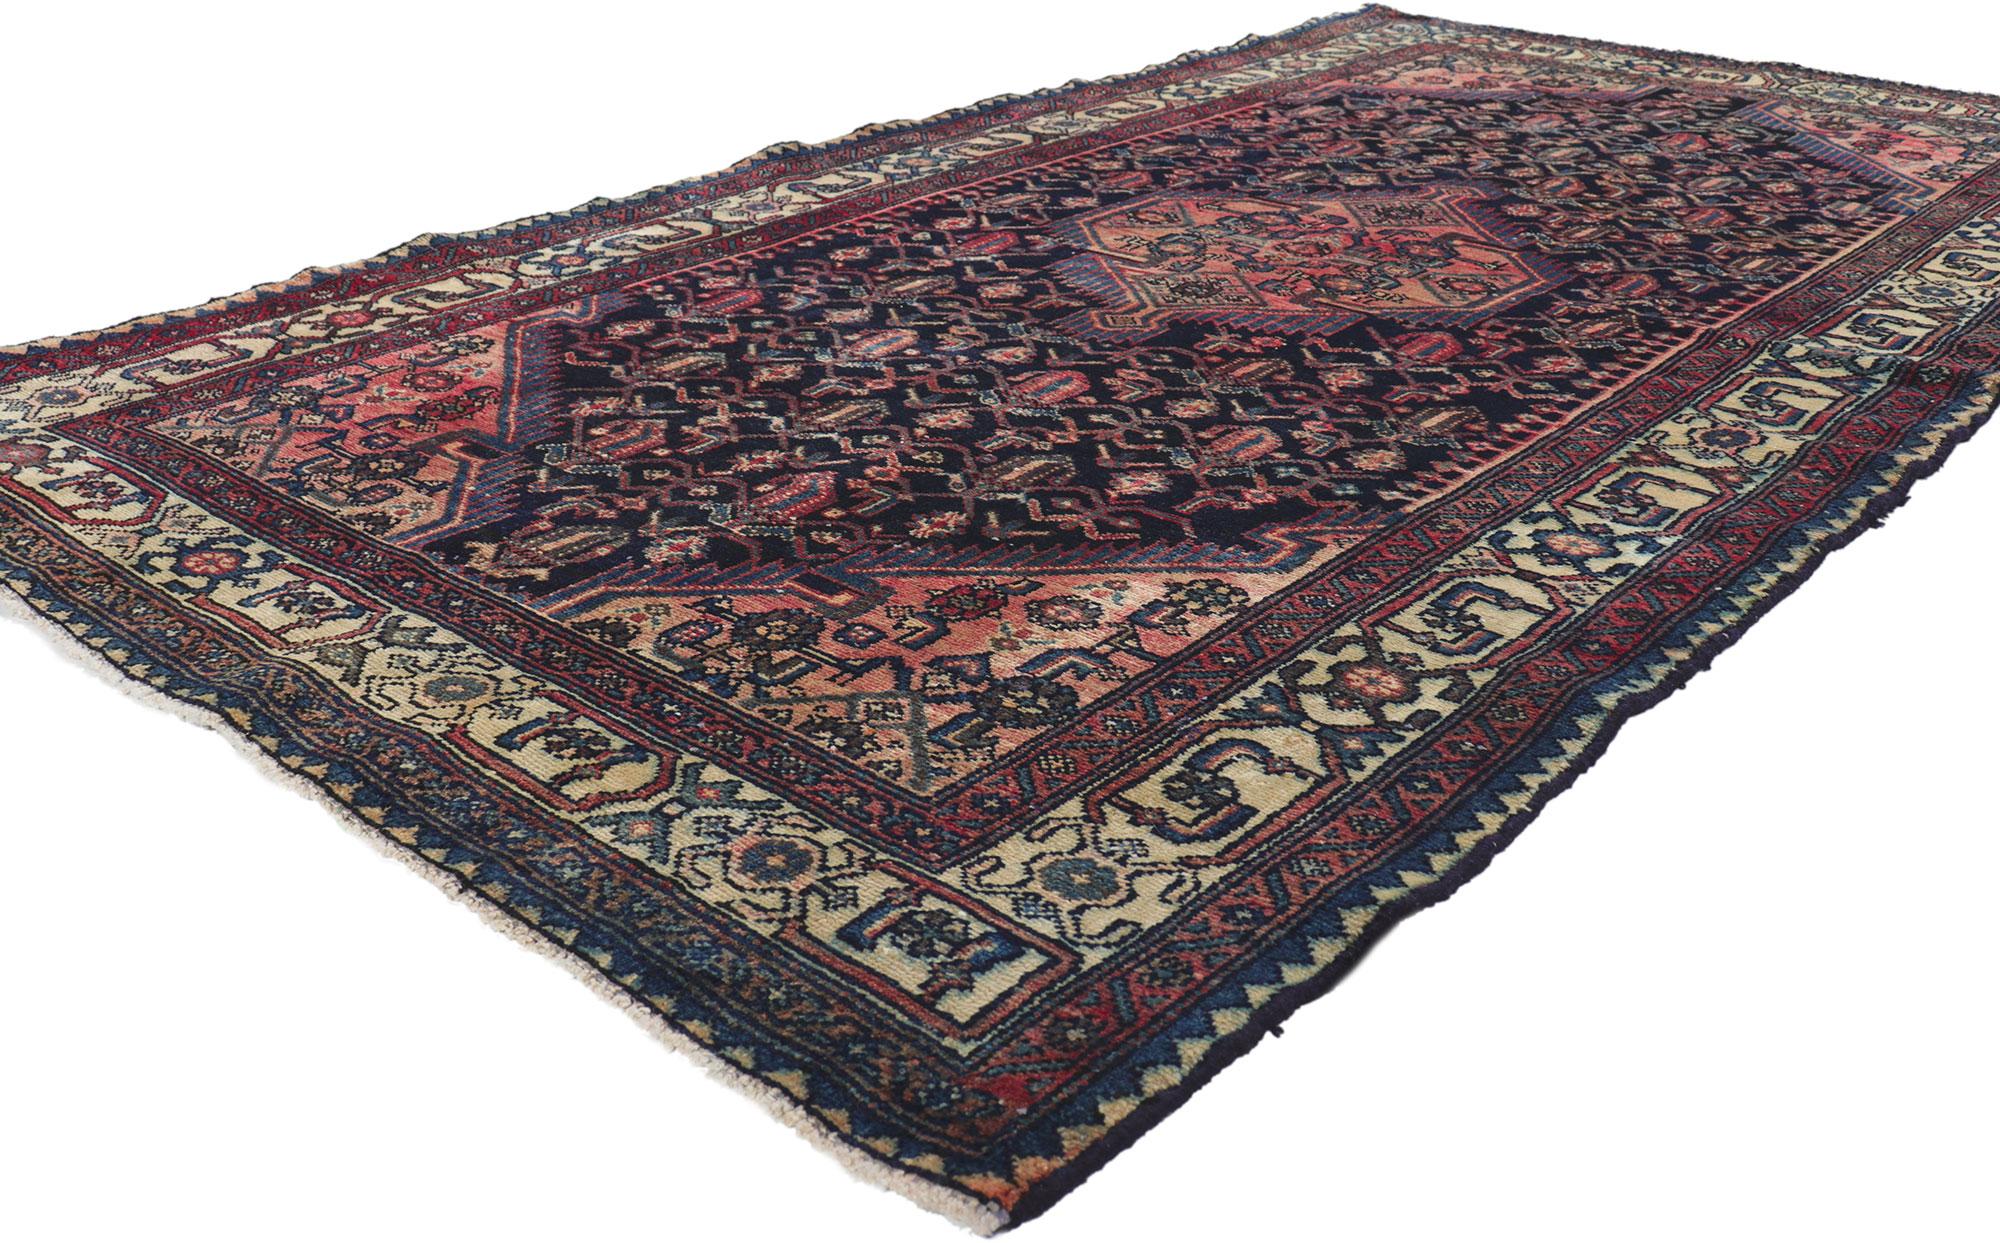 61185 Antique Persian Hamadan Rug, 04.05 x 08.03.
With its timeless style, incredible detail and texture, this hand knotted wool antique Persian Hamadan rug is poised to impress. The eye-catching Herati design and traditional color palette woven